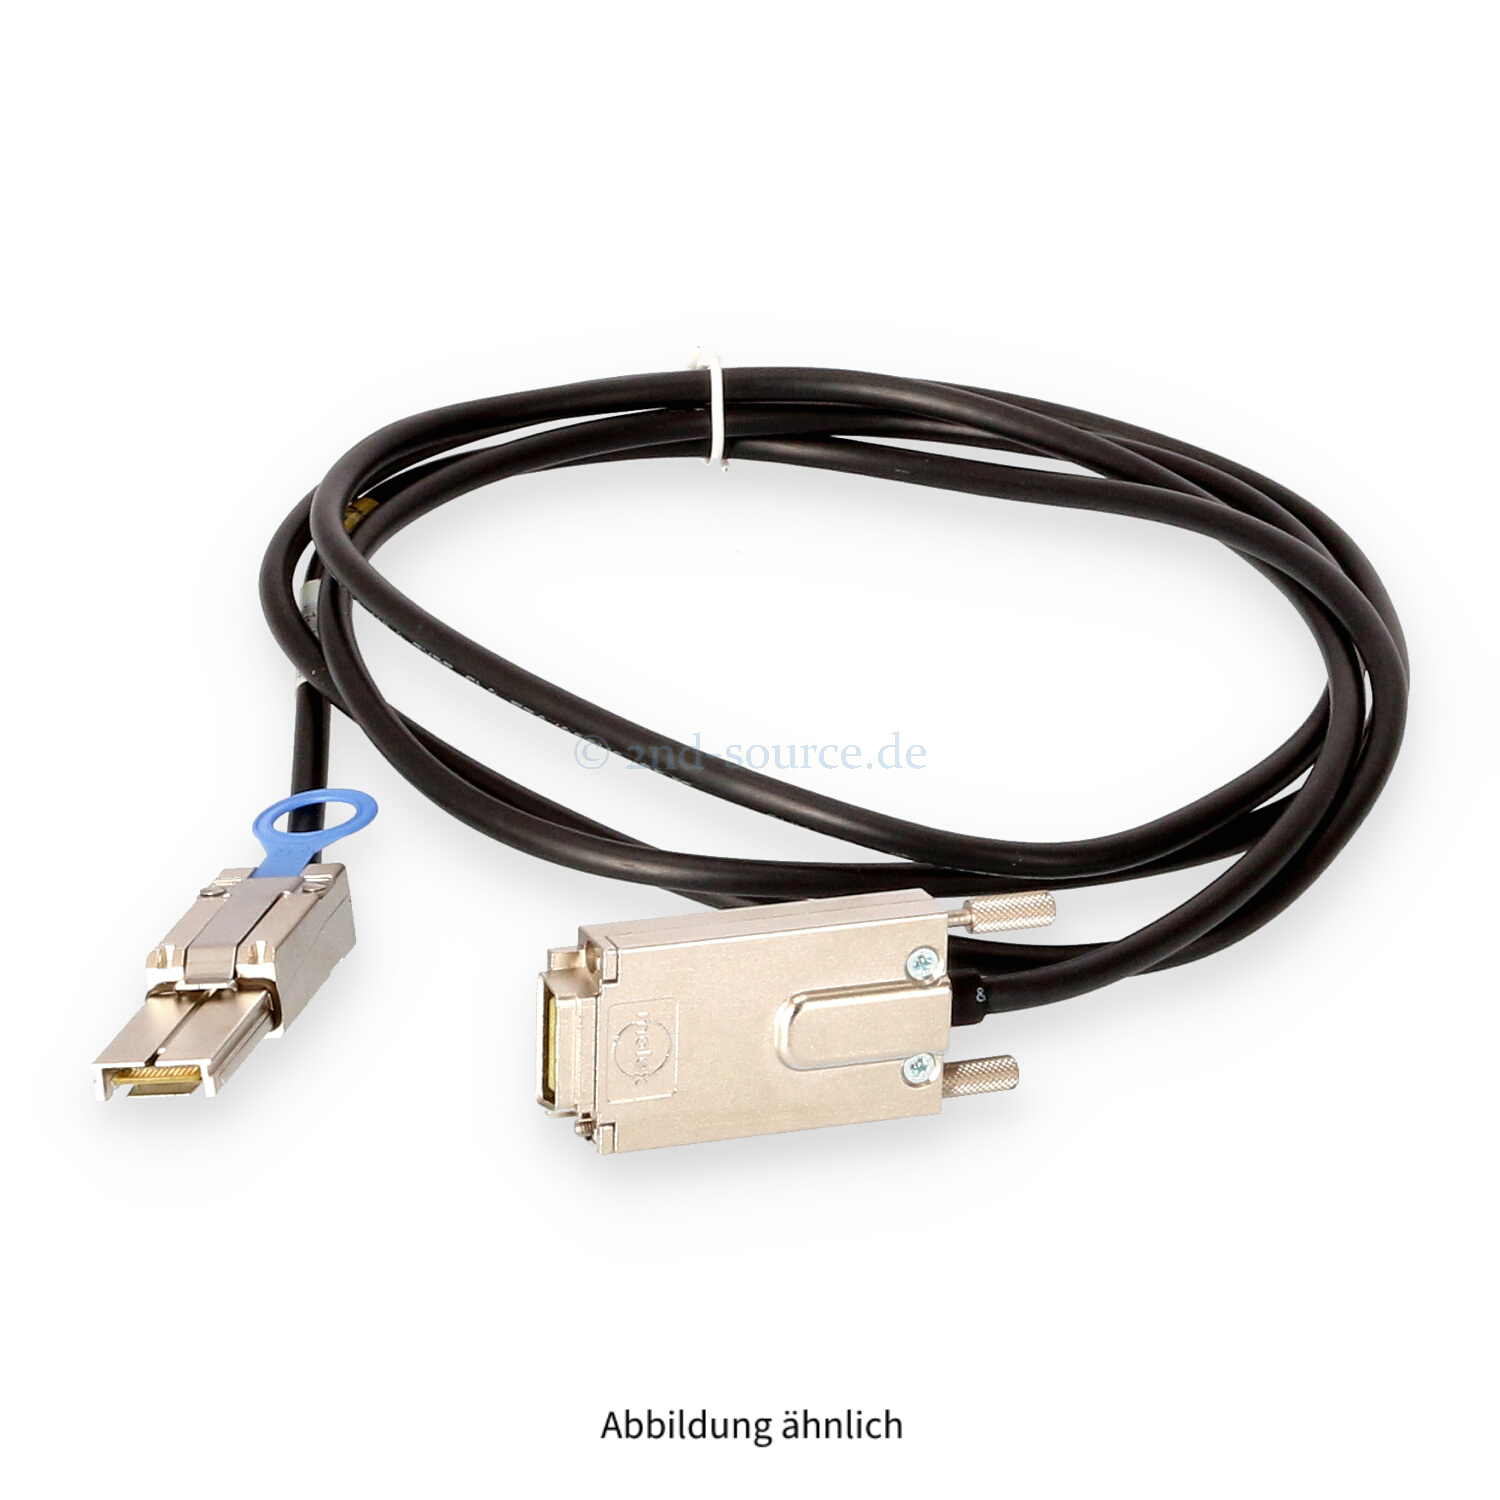 HPE 2.0m MiniSAS SFF-8470 to SFF-8088 Cable MSL2024 406591-001 430064-001